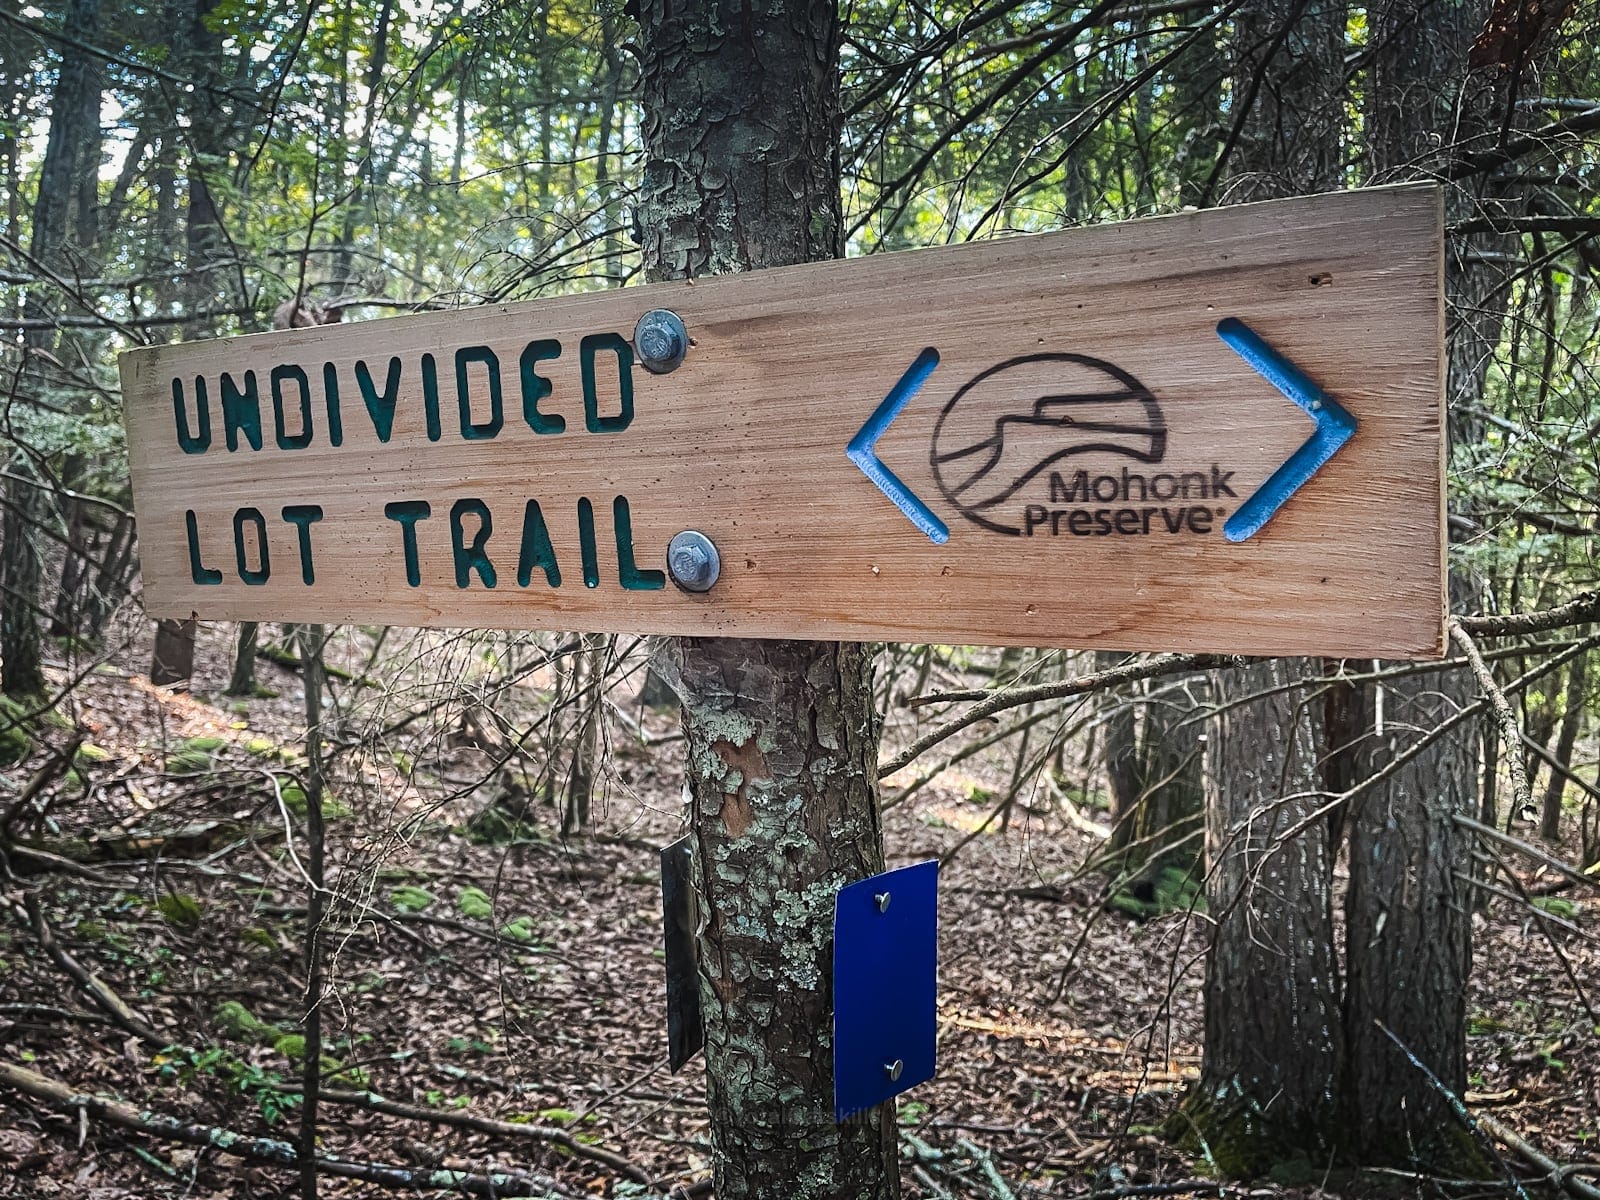 Trail signpost for Undivided Lot Trail in Mohonk Preserve